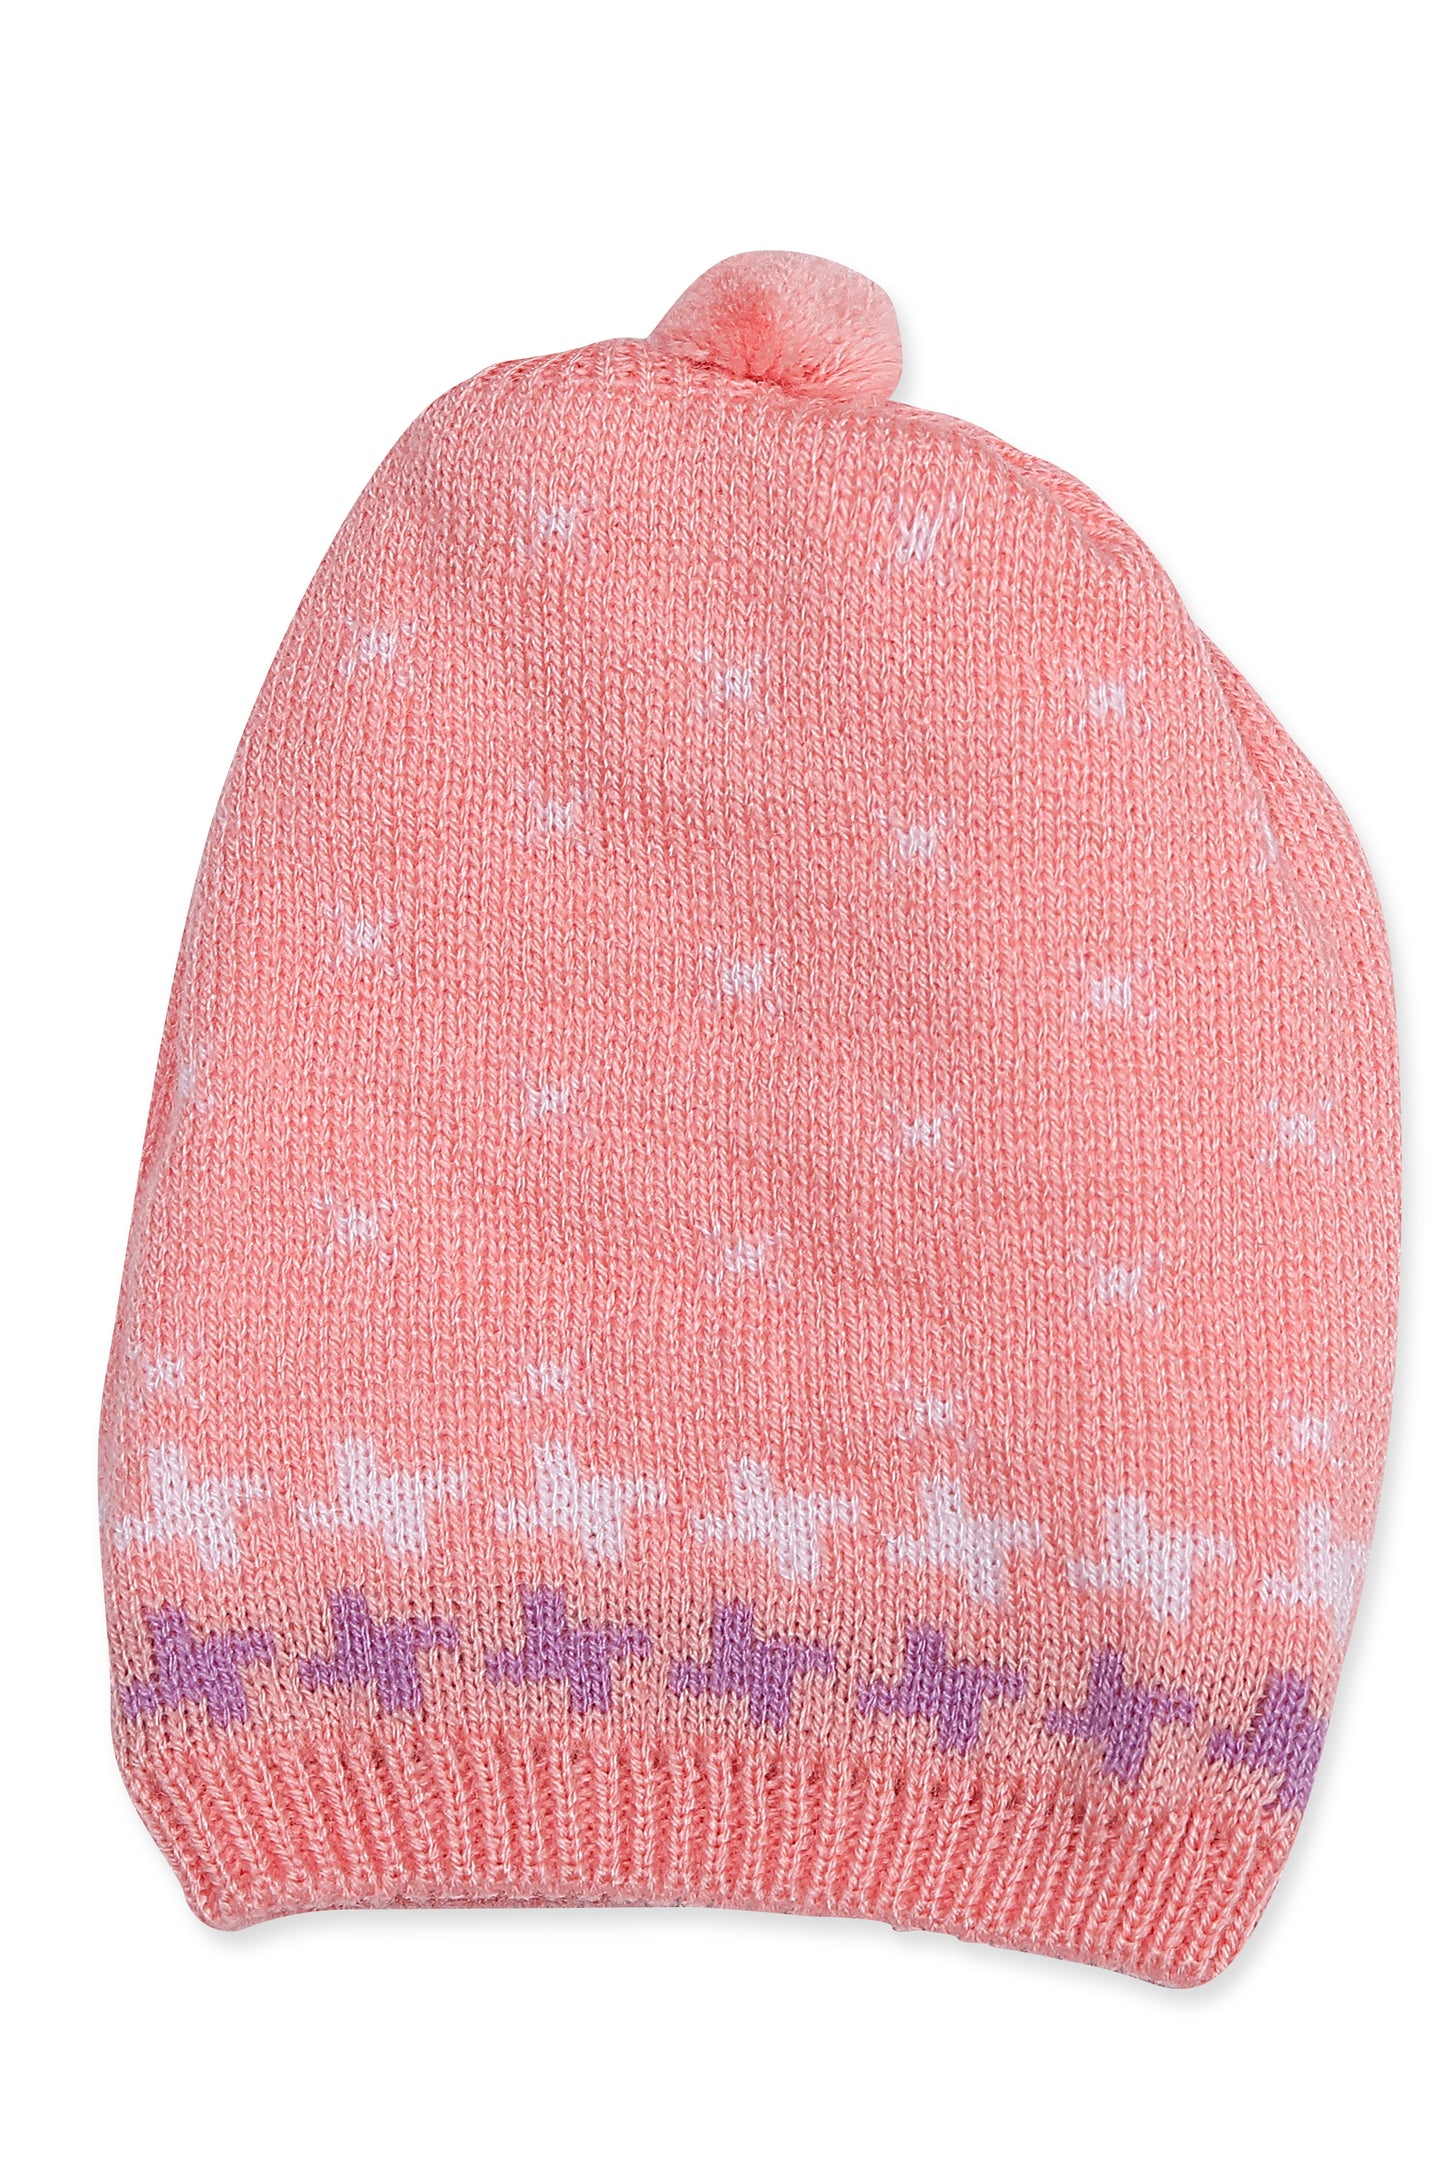 Baby Knitted Sweater, Leggings, Cap & Booties Full Suit- ABC 123 (4 Pcs) Pink